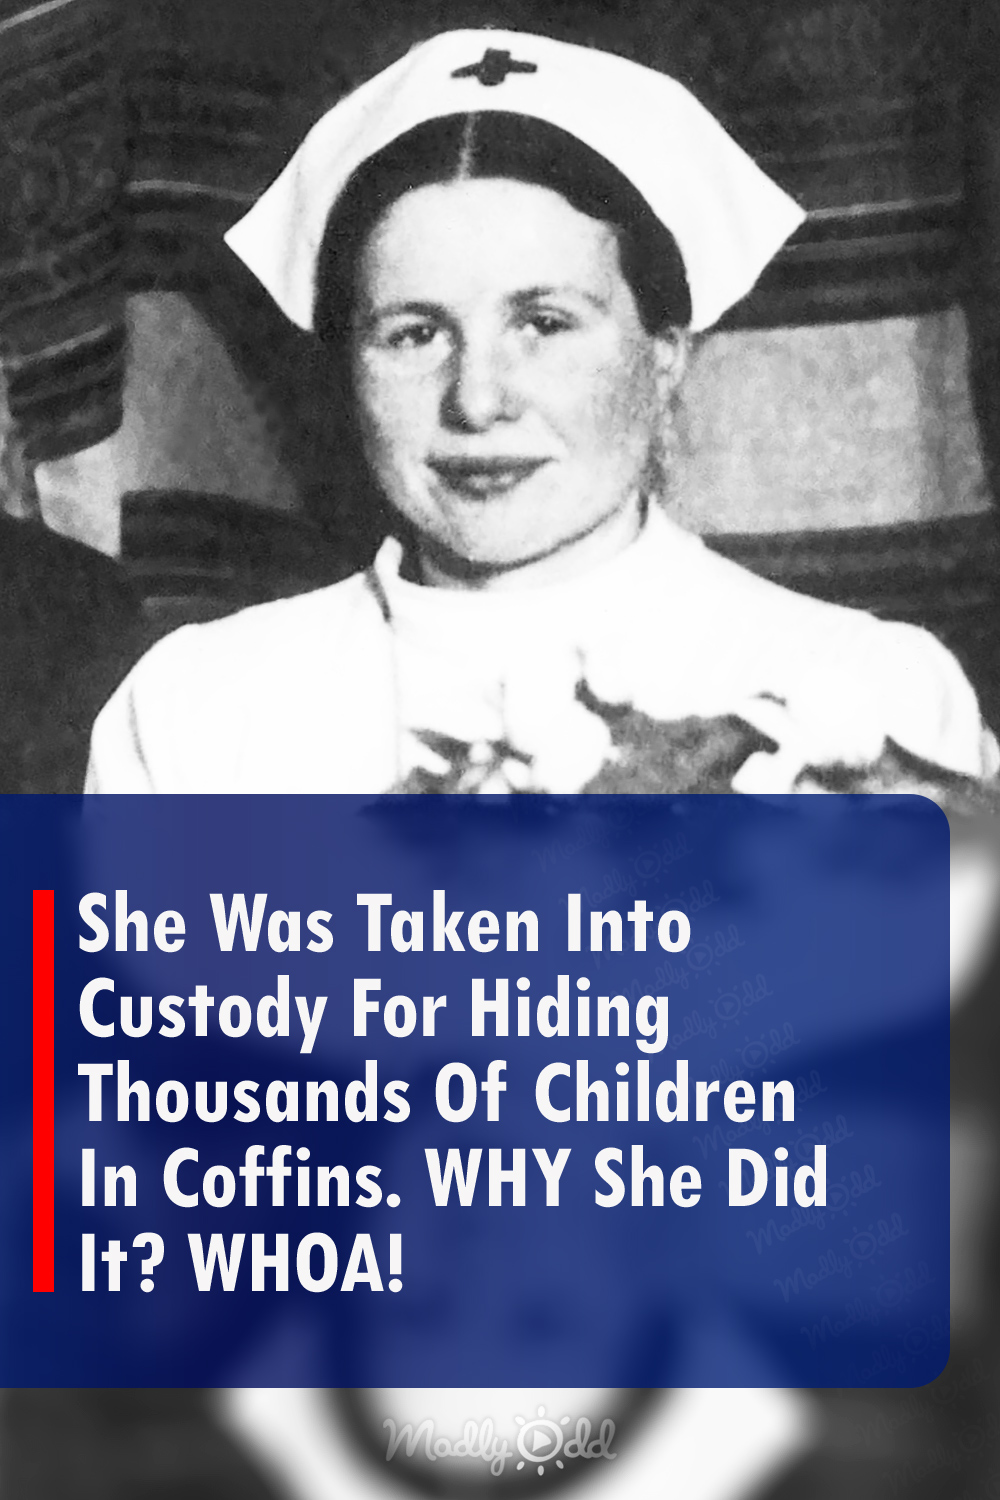 She Was Taken Into Custody For Hiding Thousands Of Children In Coffins. WHY She Did It? WHOA!